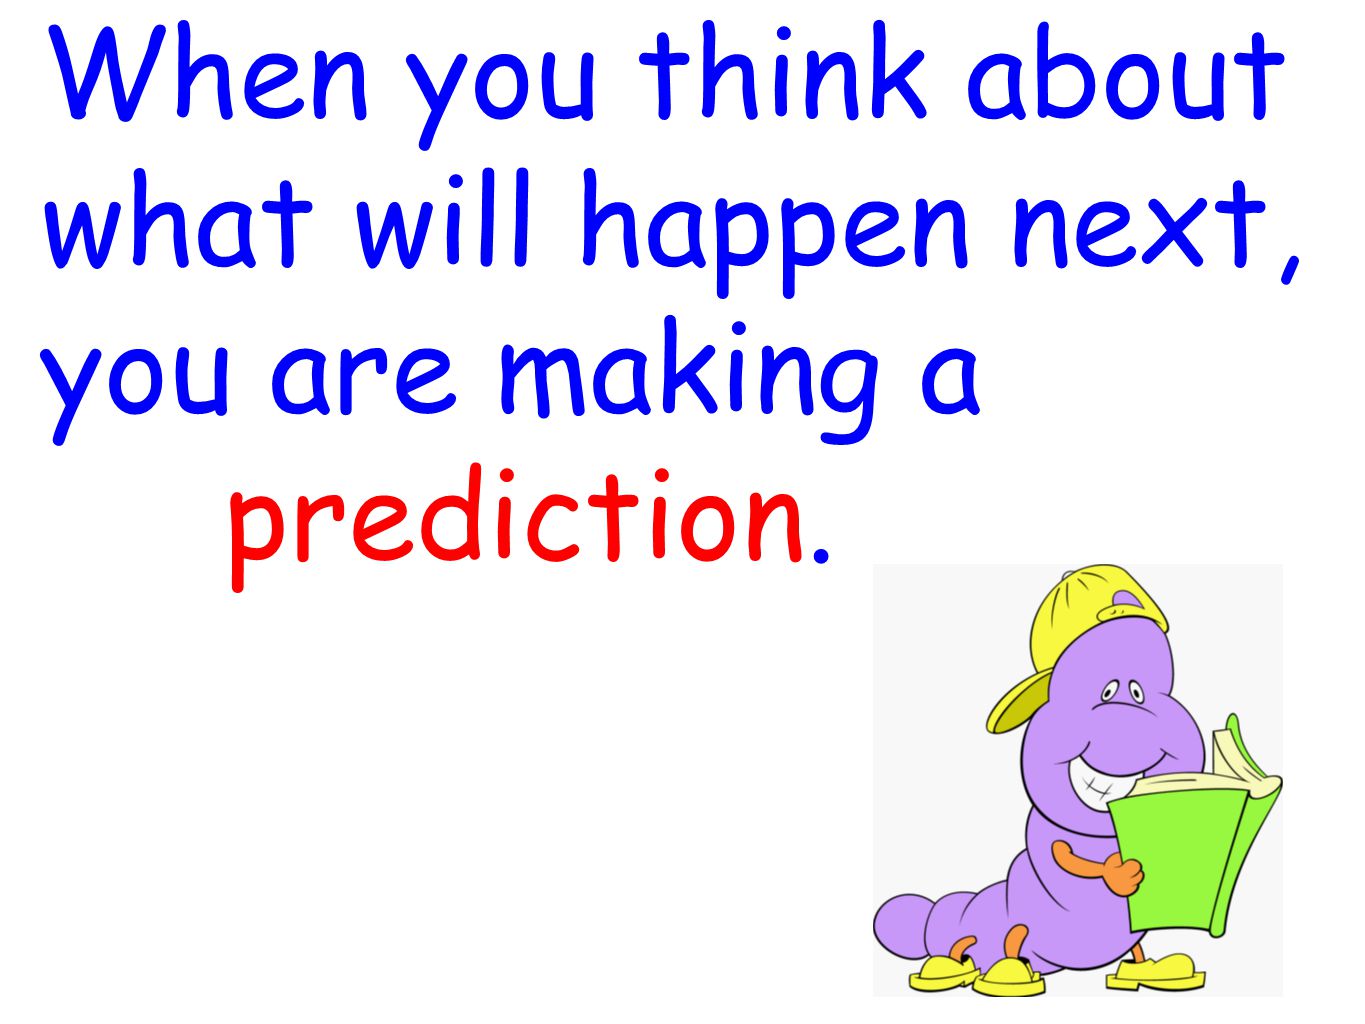 When you think about what will happen next, you are making a prediction.